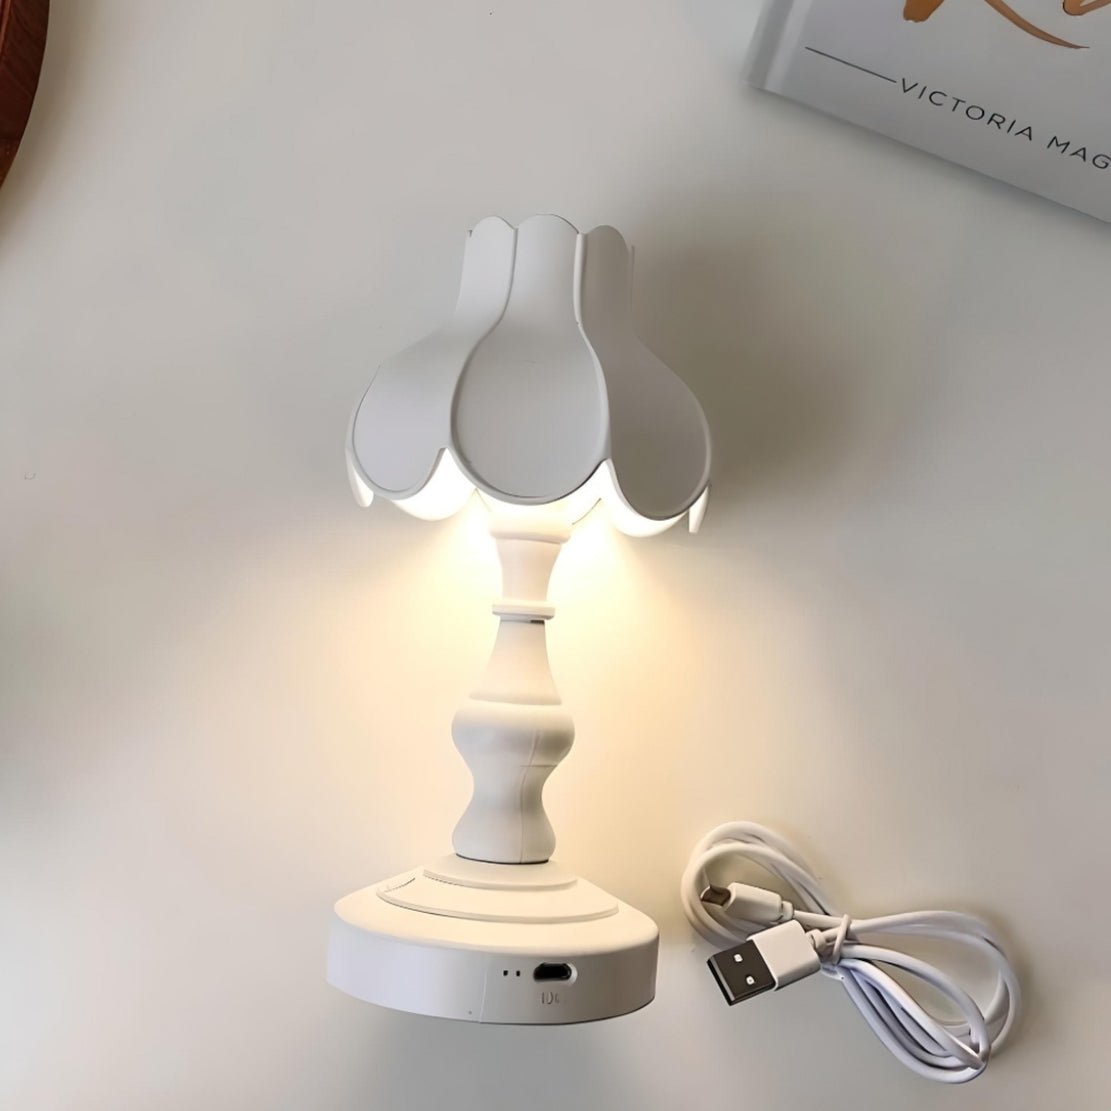 Cute, white, lotus flower USB rechargeable lamp